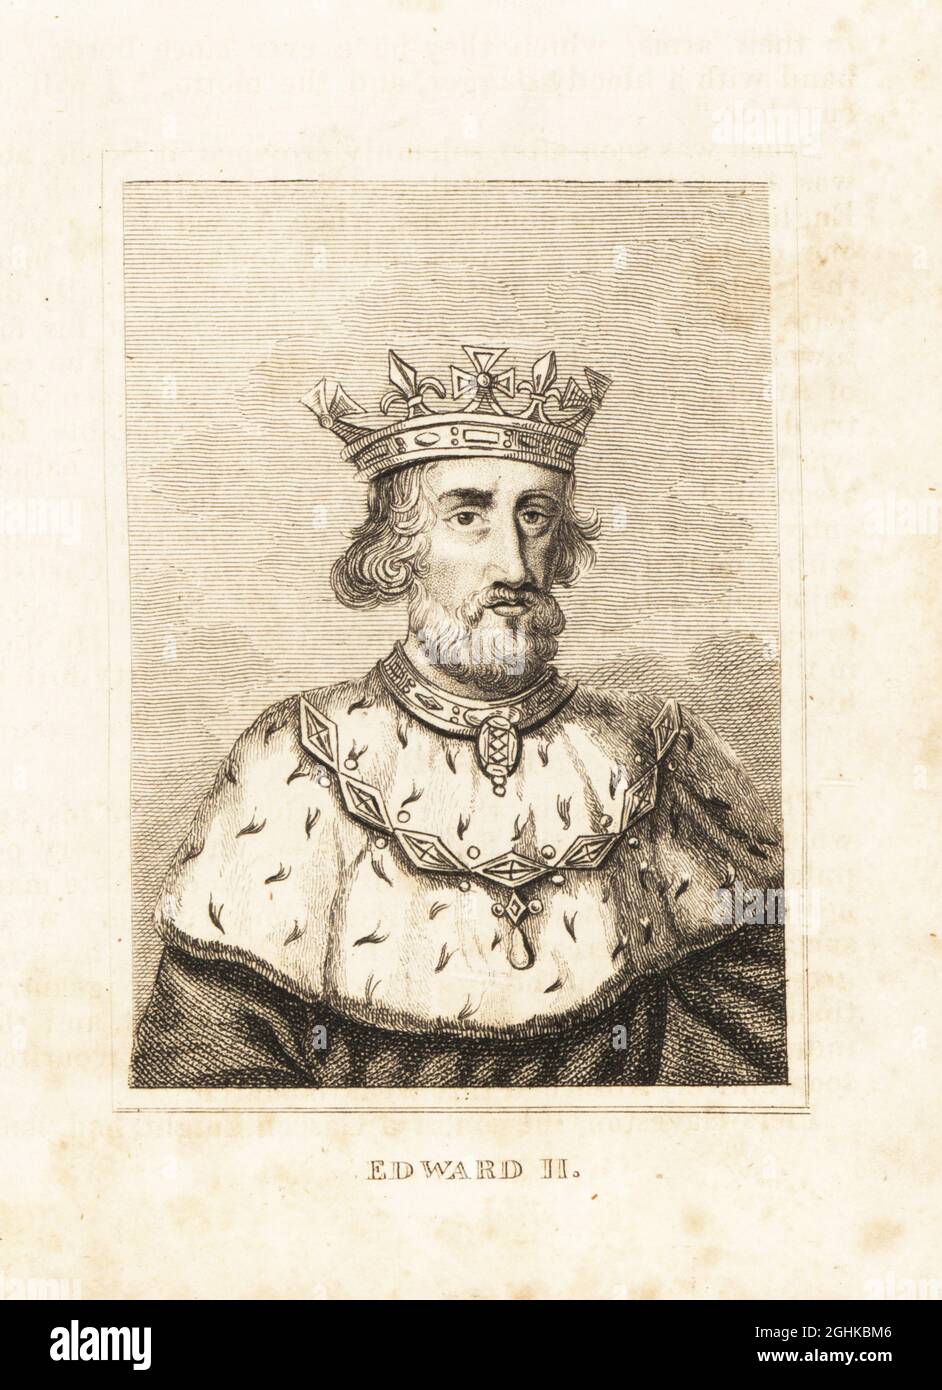 Portrait of King Edward II, 1284-1327, wearing crown, ermine collar, cloak and gold chain. Copperplate engraving from M. A. Jones’ History of England from Julius Caesar to George IV, G. Virtue, 26 Ivy Lane, London, 1836. Stock Photo